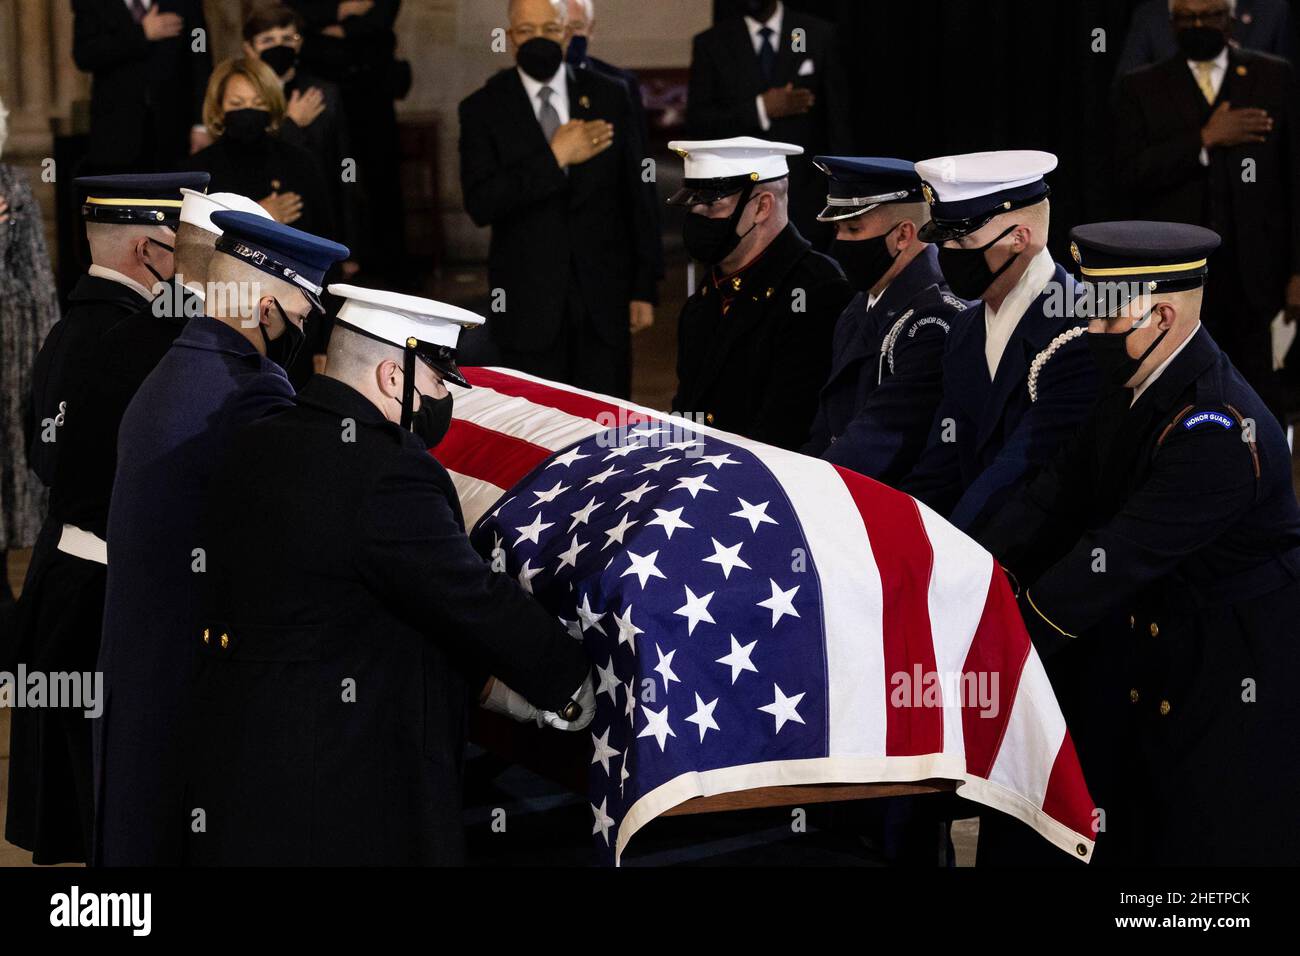 A U.S. Joint Forces bearer team places the flag-draped casket of former Senate Majority Leader Harry Reid, D-NV, inside the U.S. Capitol where he will lie in state, Wednesday, Jan. 12, 2022, in Washington. Reid, who served five terms in the Senate, will be honored Wednesday in the Capitol Rotunda during a ceremony closed to the public under COVID-19 protocols.Credit: Graeme Jennings/Pool via CNP /MediaPunch Stock Photo